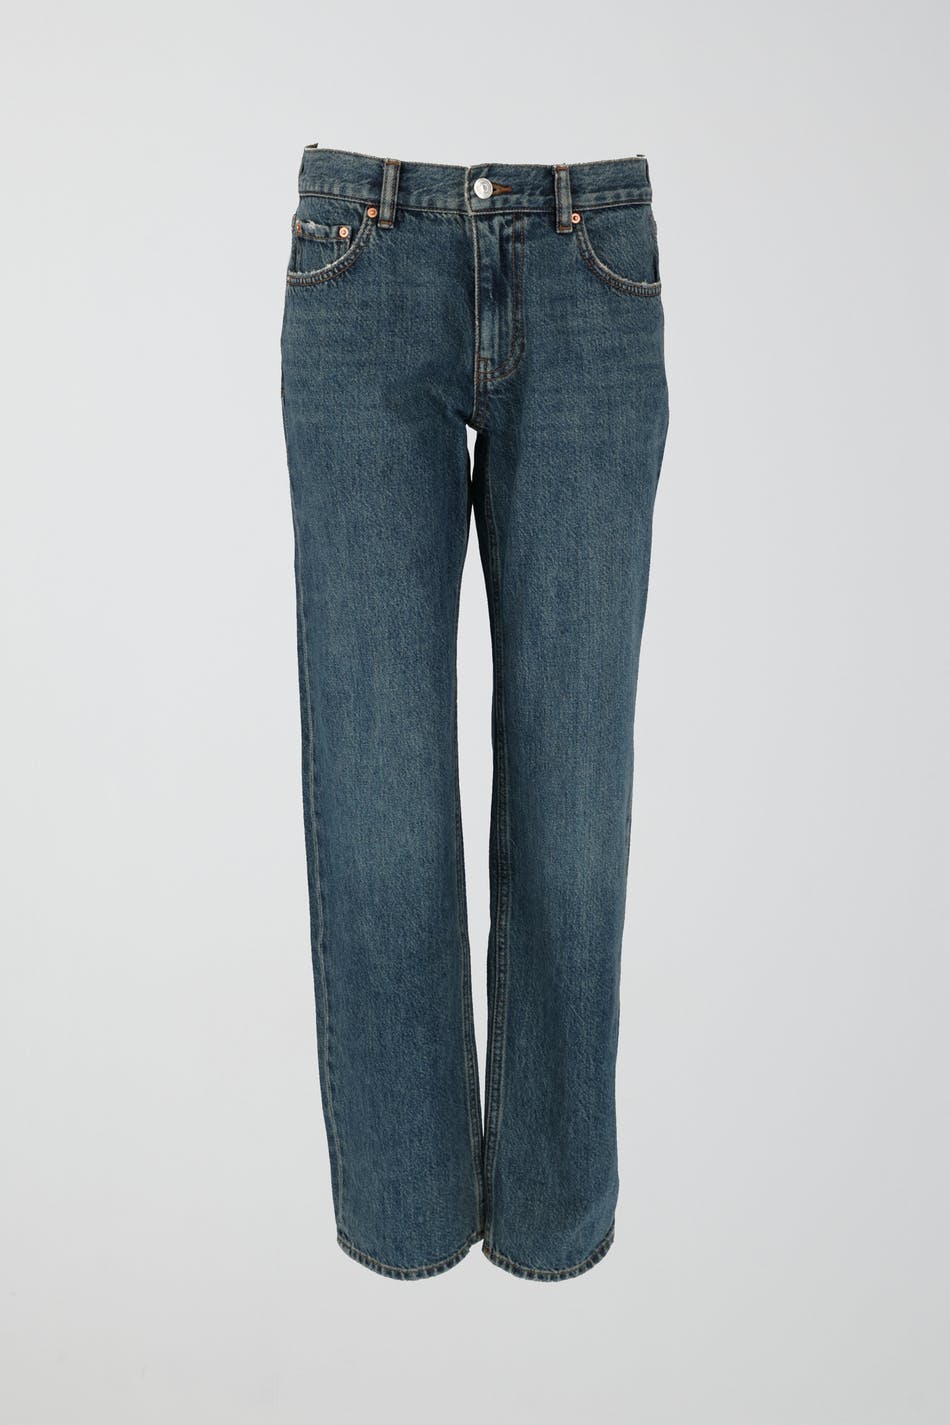 Gina Tricot - Low straight petite jeans - low-straight-jeans - Blue - 34 - Female